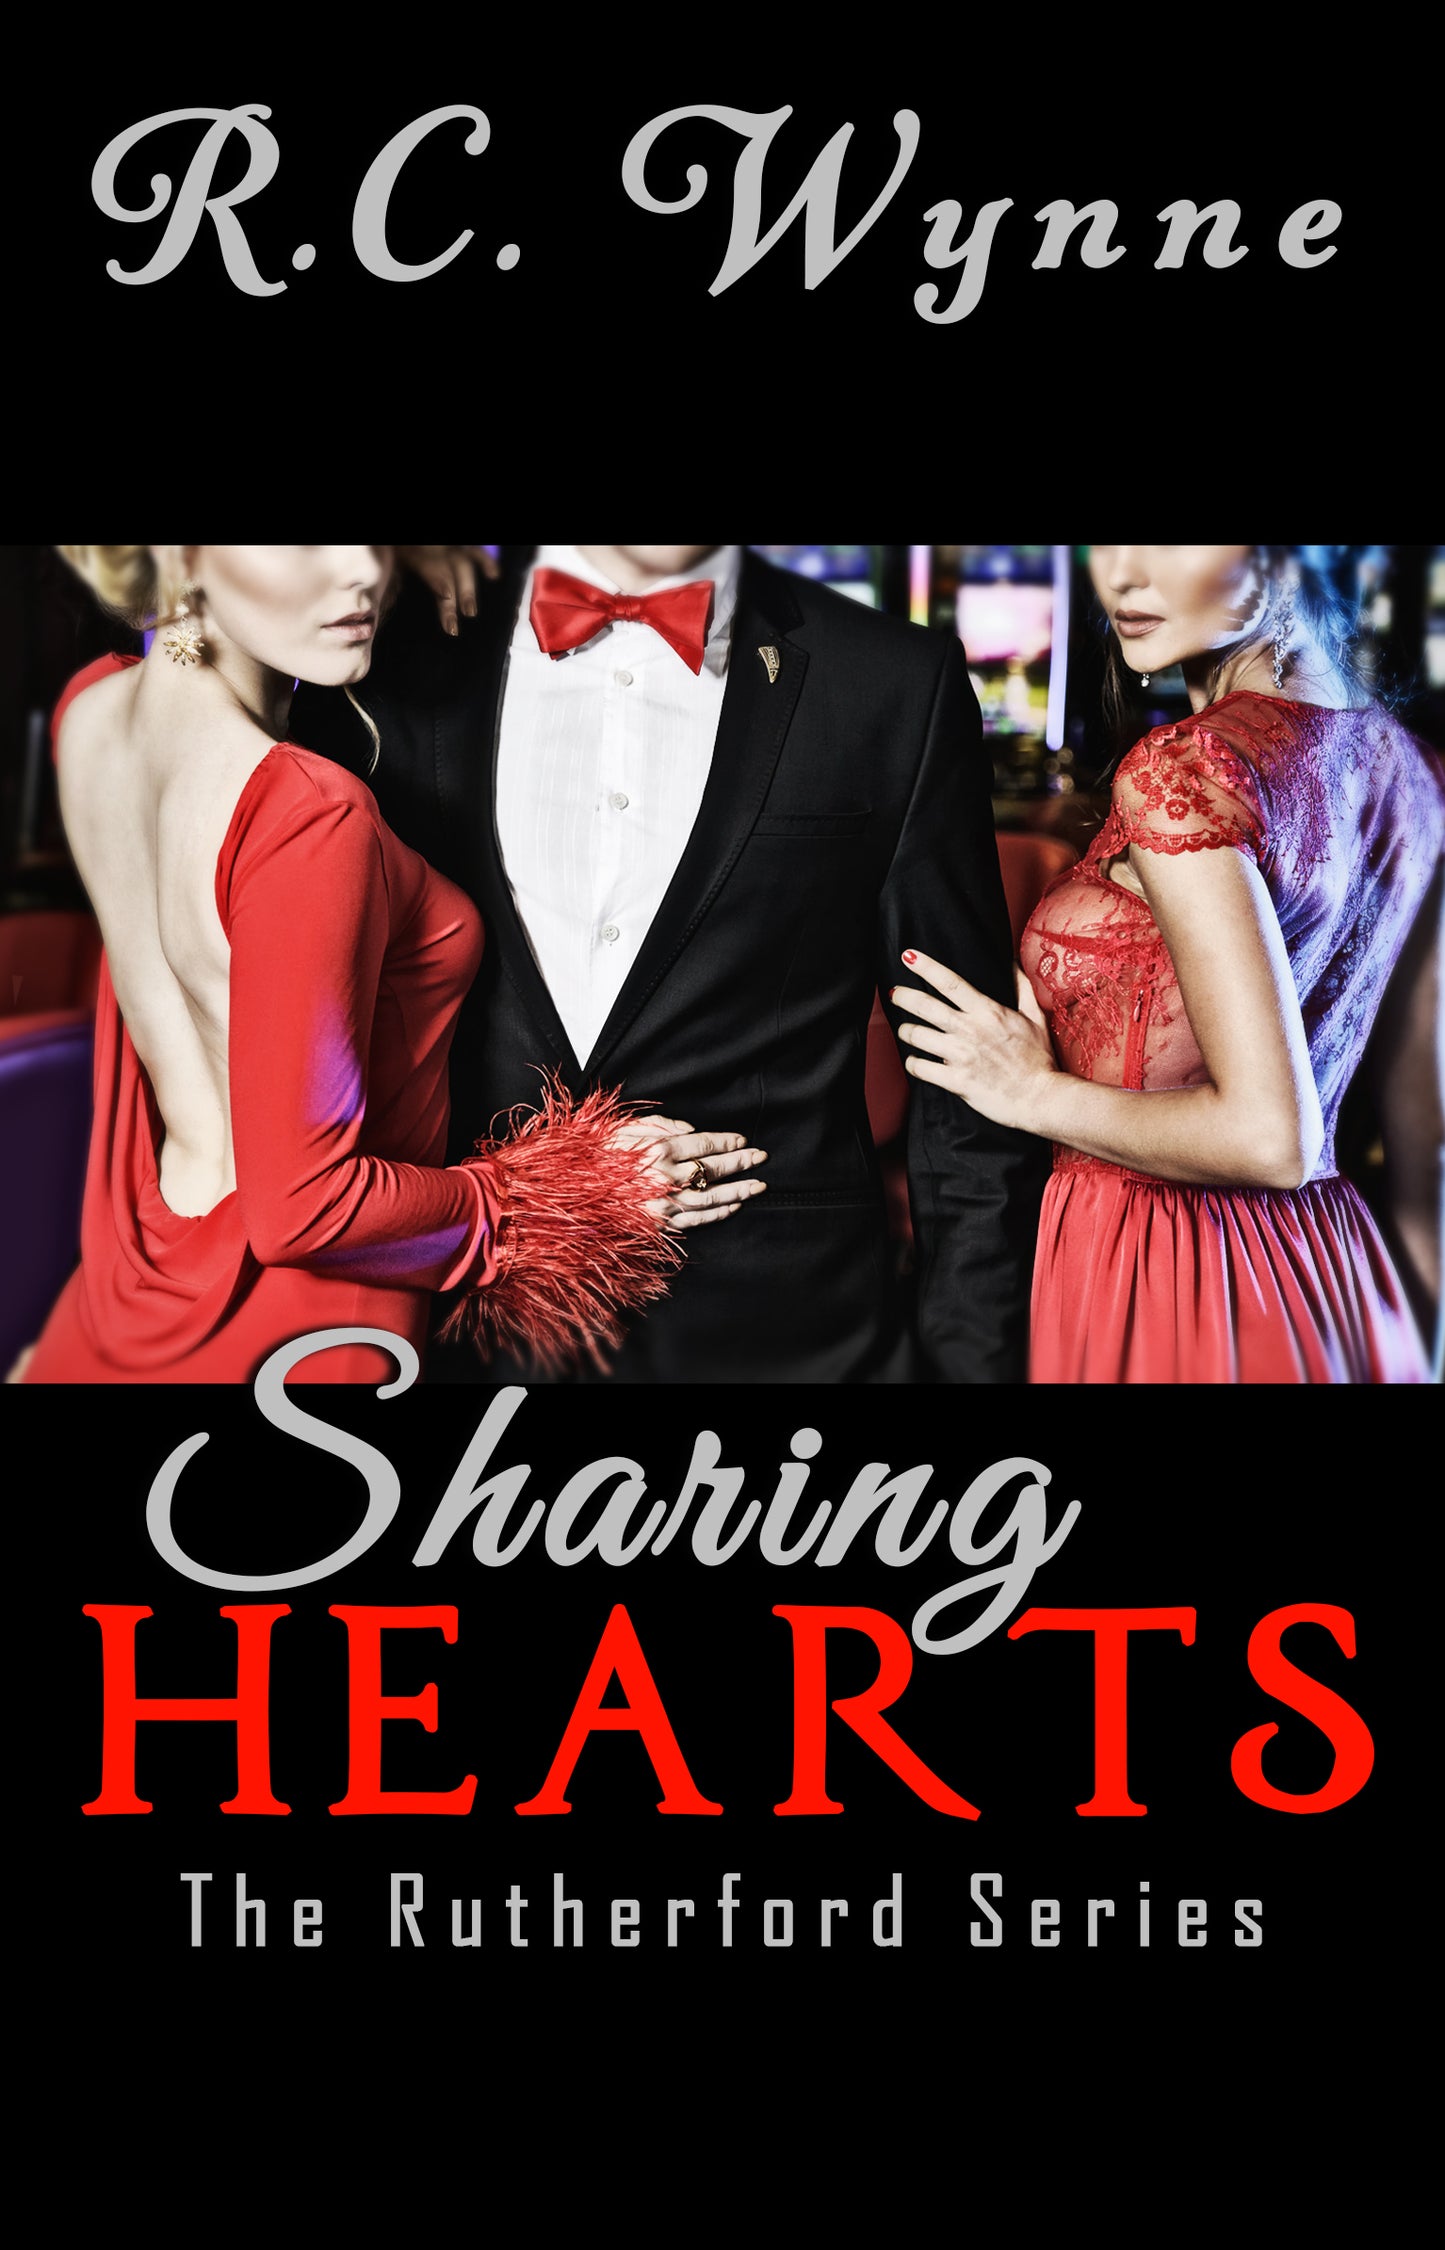 The Rutherford Series - Book 5 - Sharing Hearts